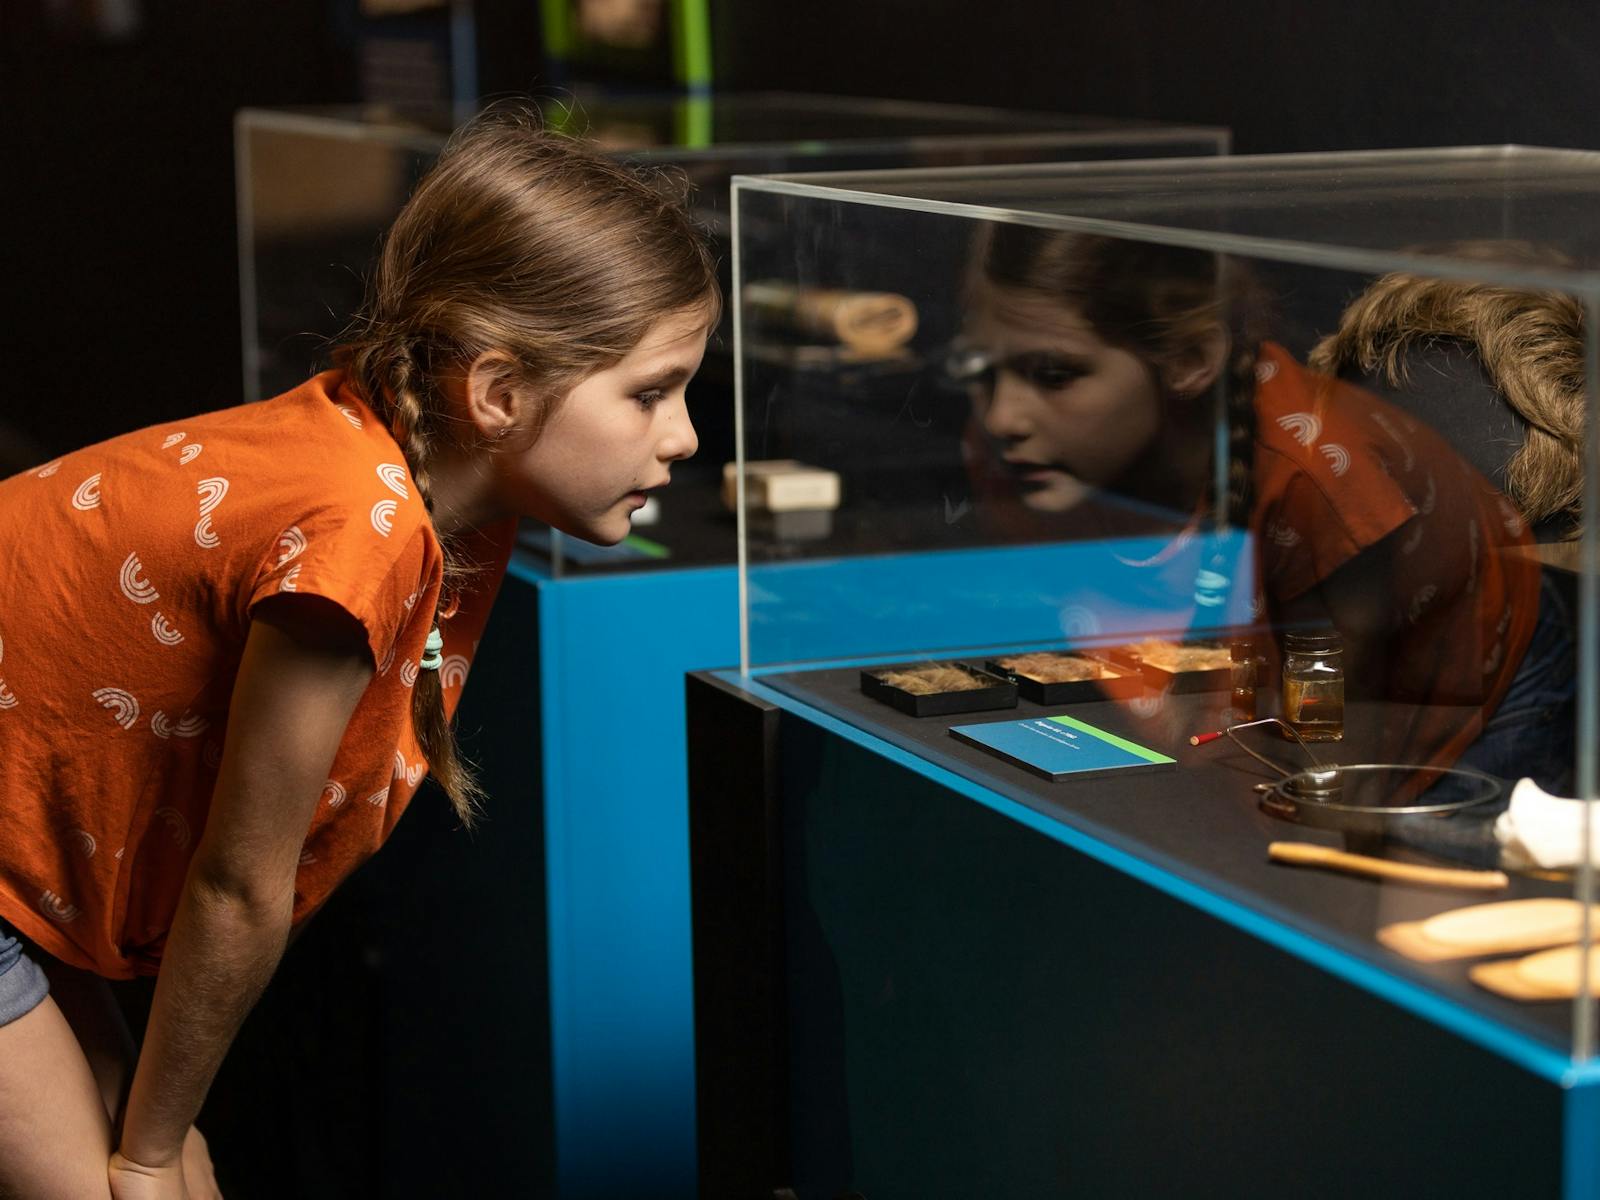 Young girl looks in exhibition clear case full of disguises and spy gadgets